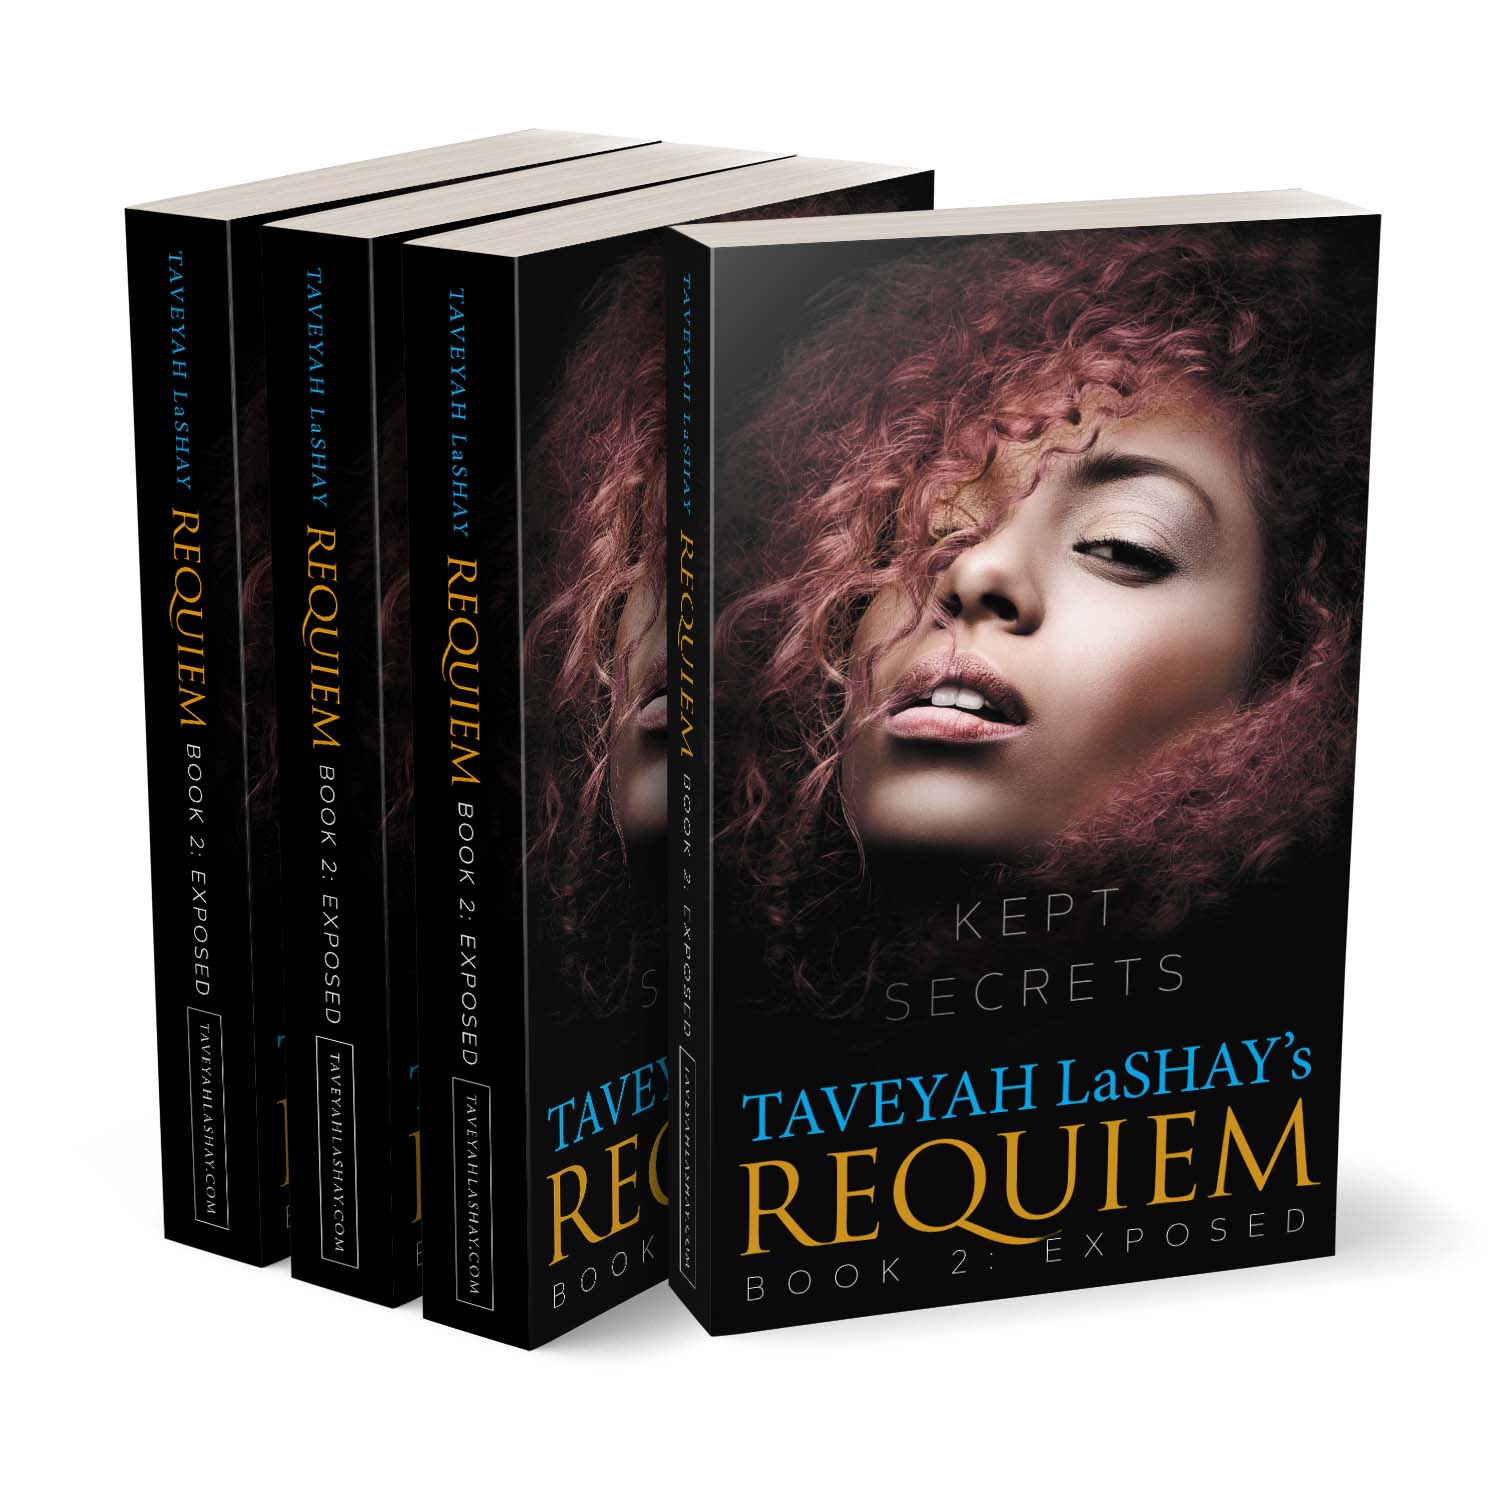 The Requiem Trilogy is a dark and steamy thriller series. The author is Taveyah LaShay. The book cover and interior formatting are designed by Mark Thomas of coverness.com. To find out more about my book design services, please visit www.coverness.com